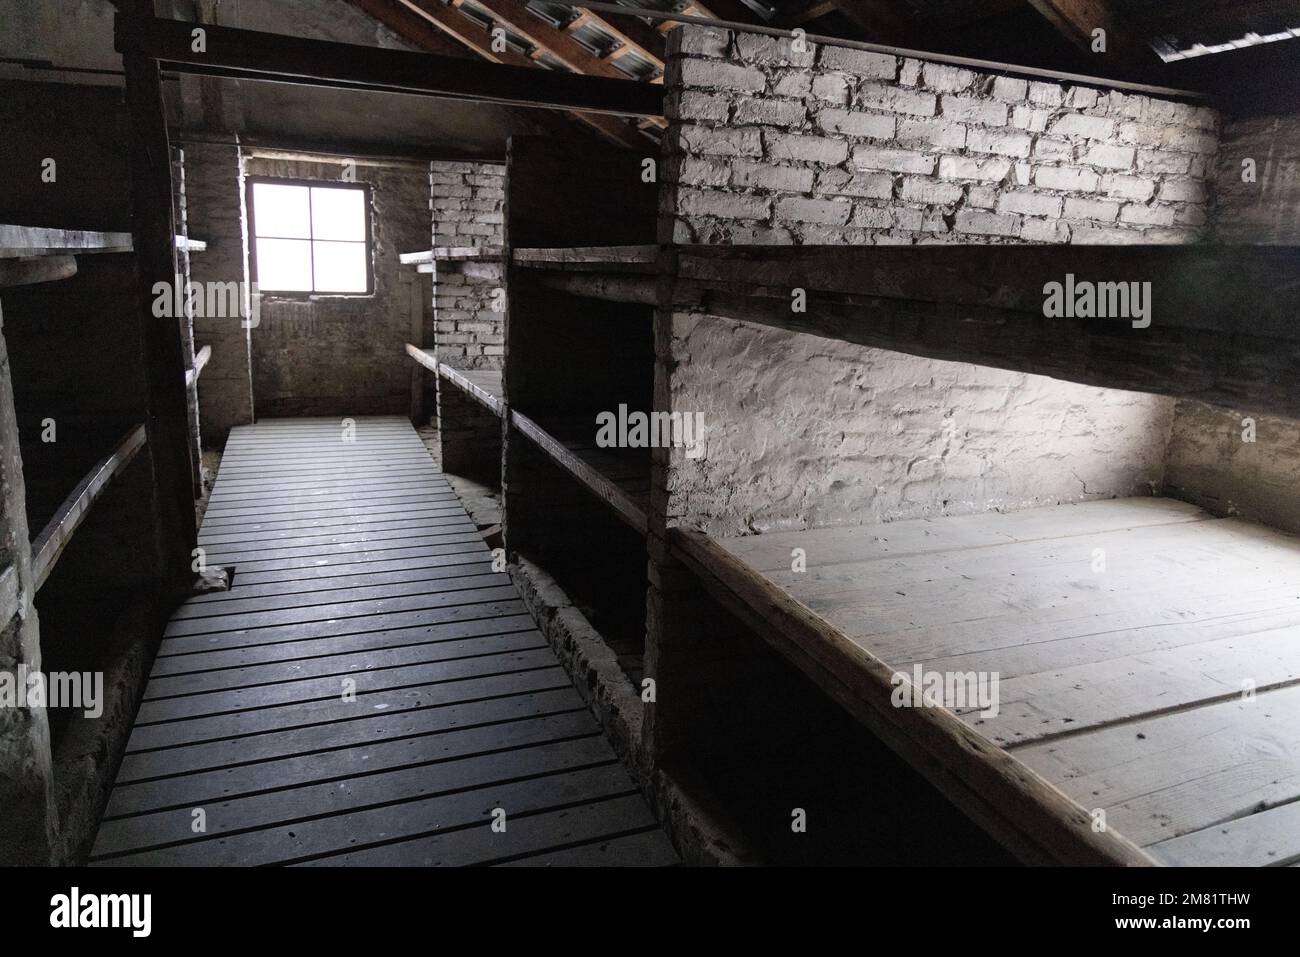 Auschwitz Birkenau Nazi Concentration camp - Interior of the Death Barrack where prisoners were kept prior to the gas chambers, Poland Europe. Stock Photo